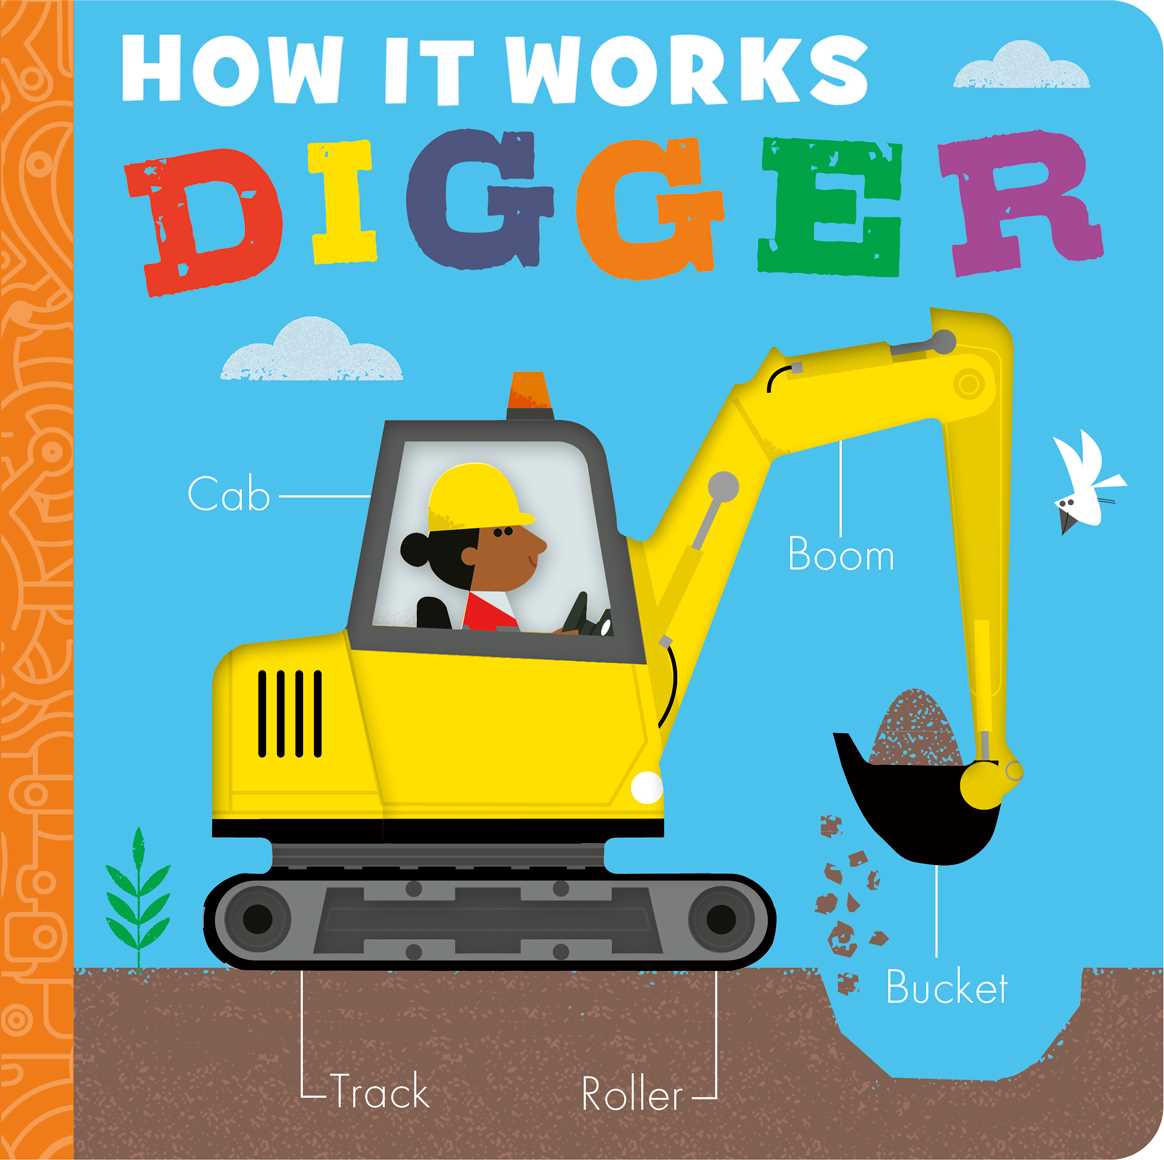 Digger (How It Works)